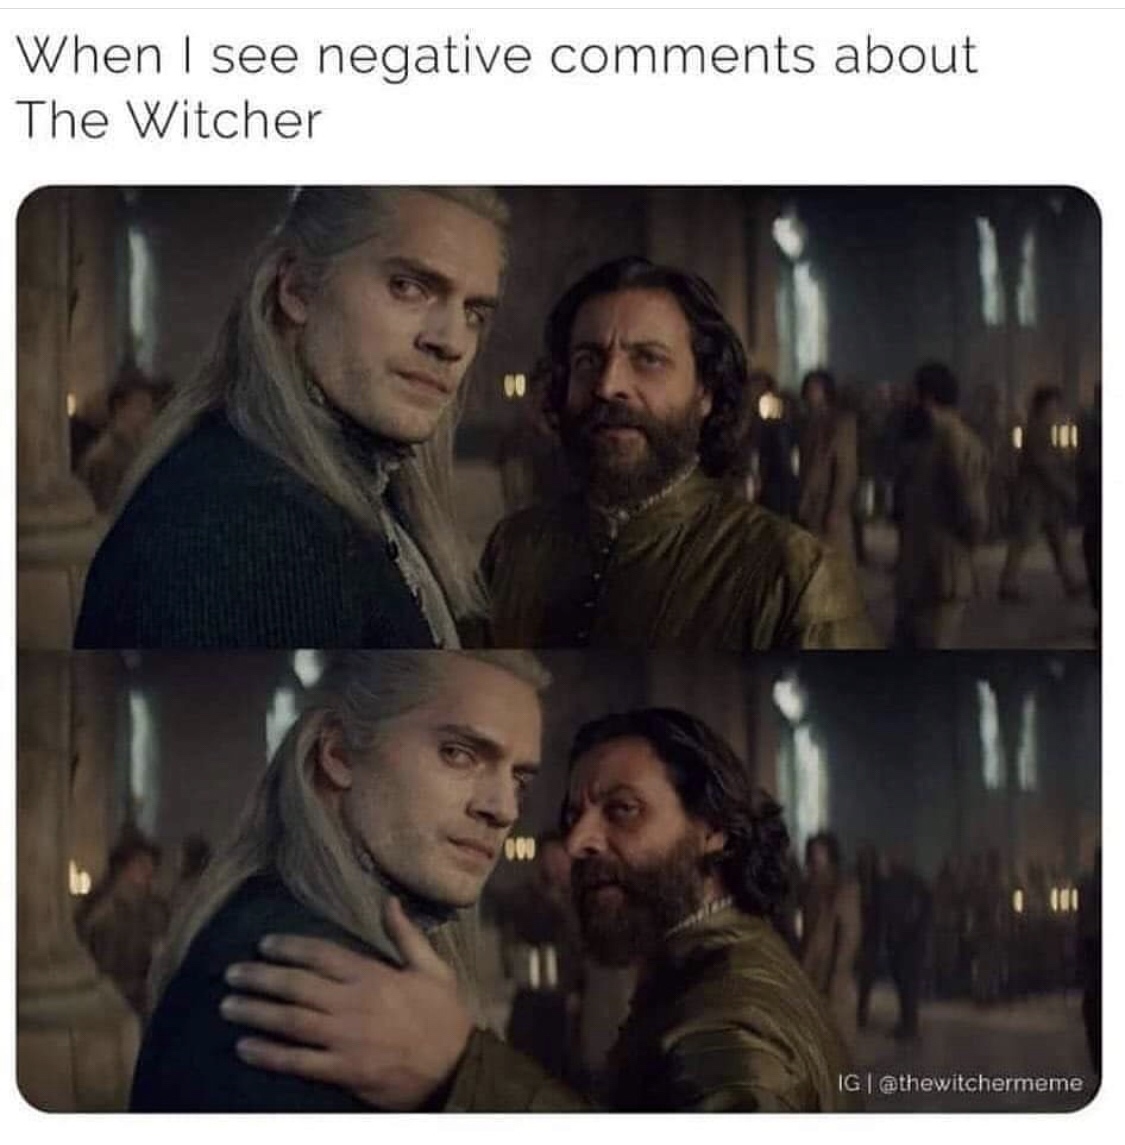 film - When I see negative about The Witcher Ti Ig